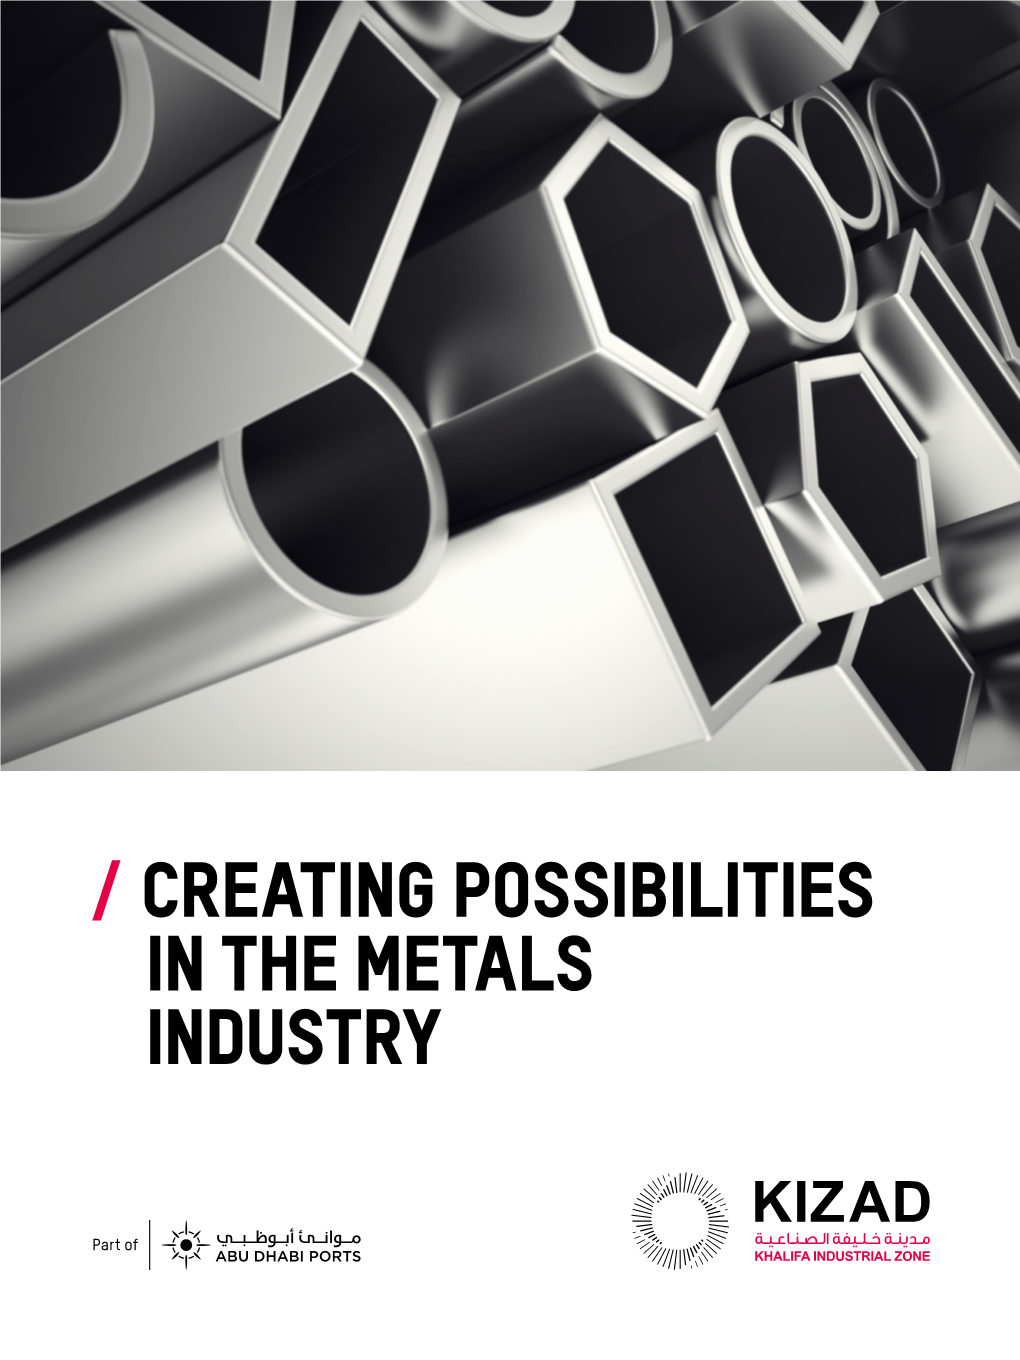 Creating Possibilities in the Metals Industry Creating Possibilities in the Metals Industry